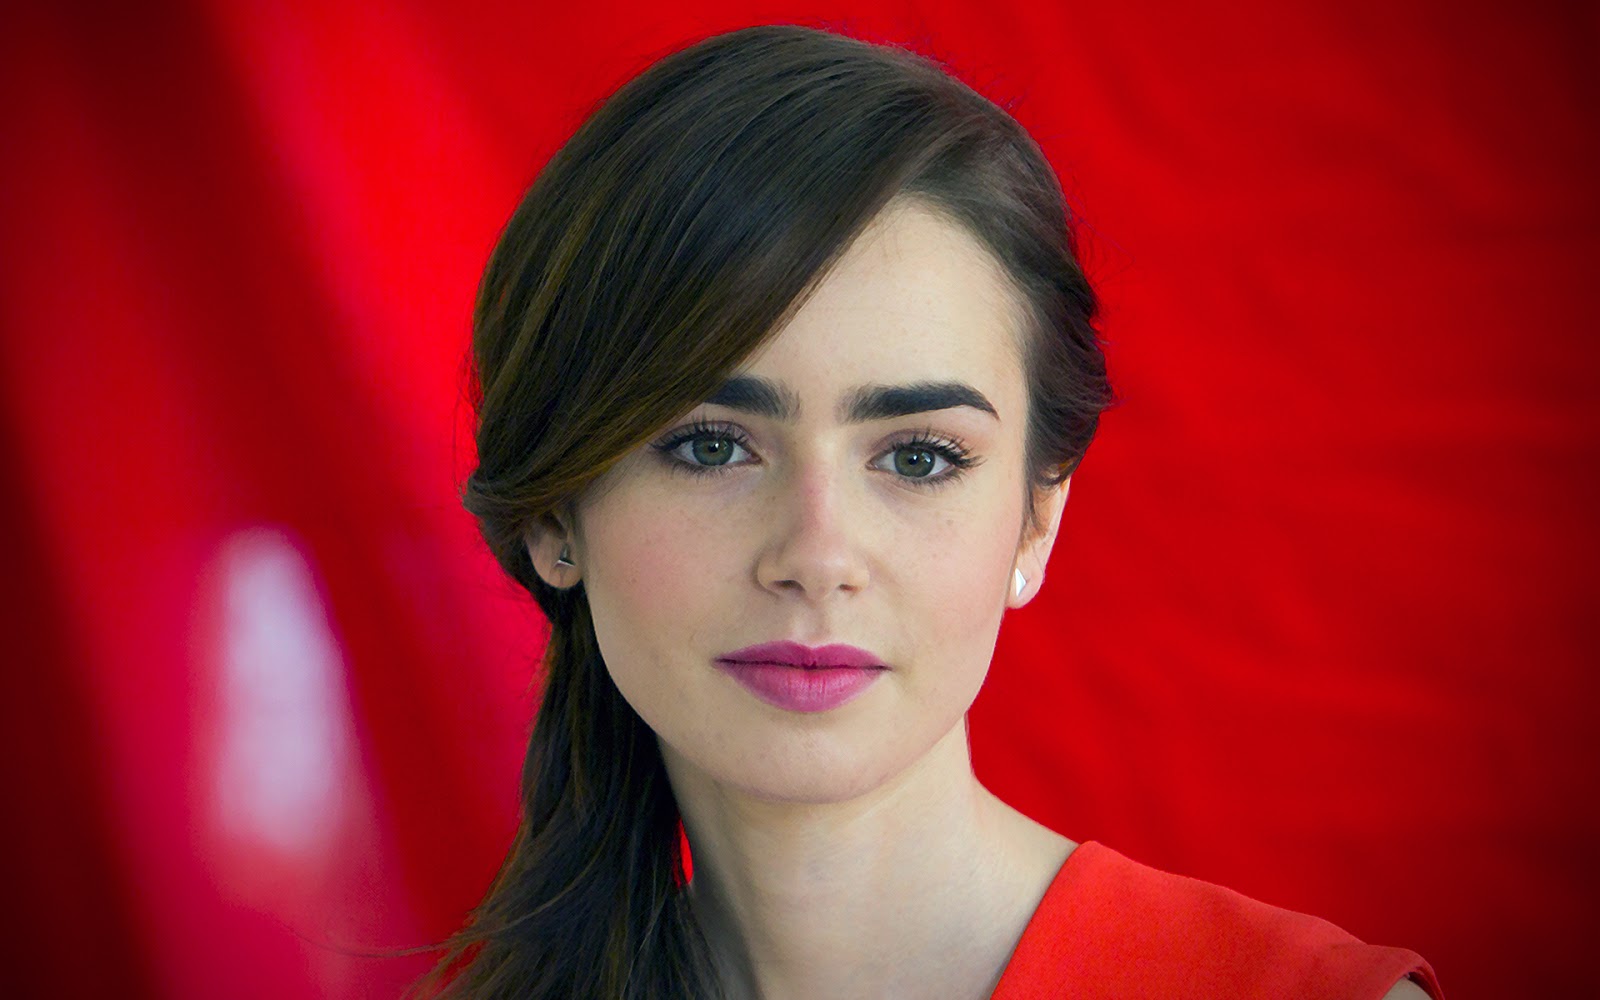 lily collins wallpaper,hair,face,lip,eyebrow,red